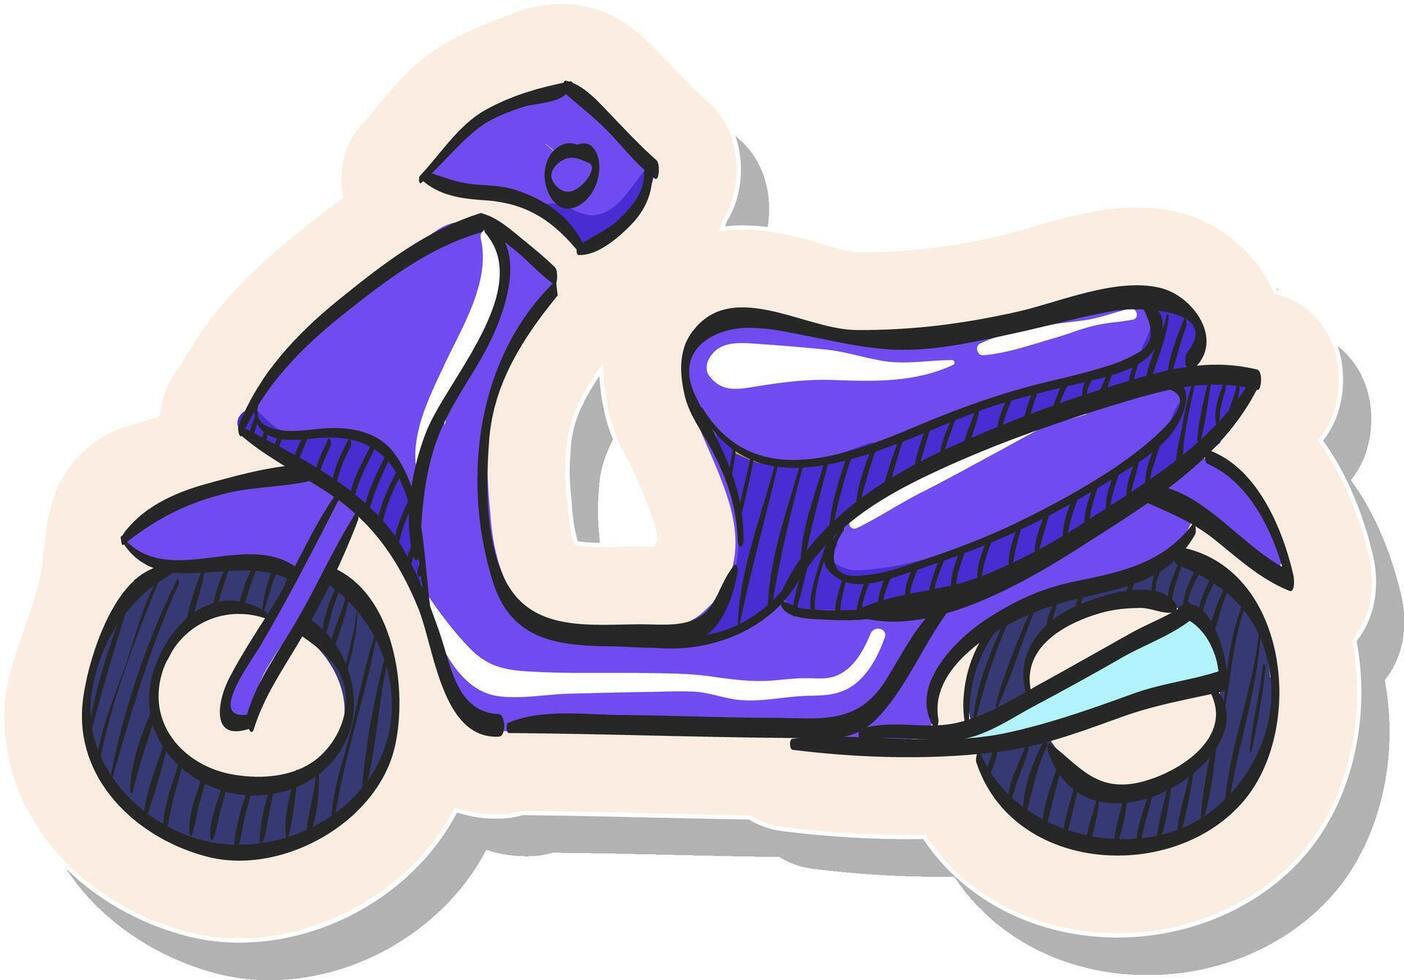 Hand drawn Motorcycle icon in sticker style vector illustration